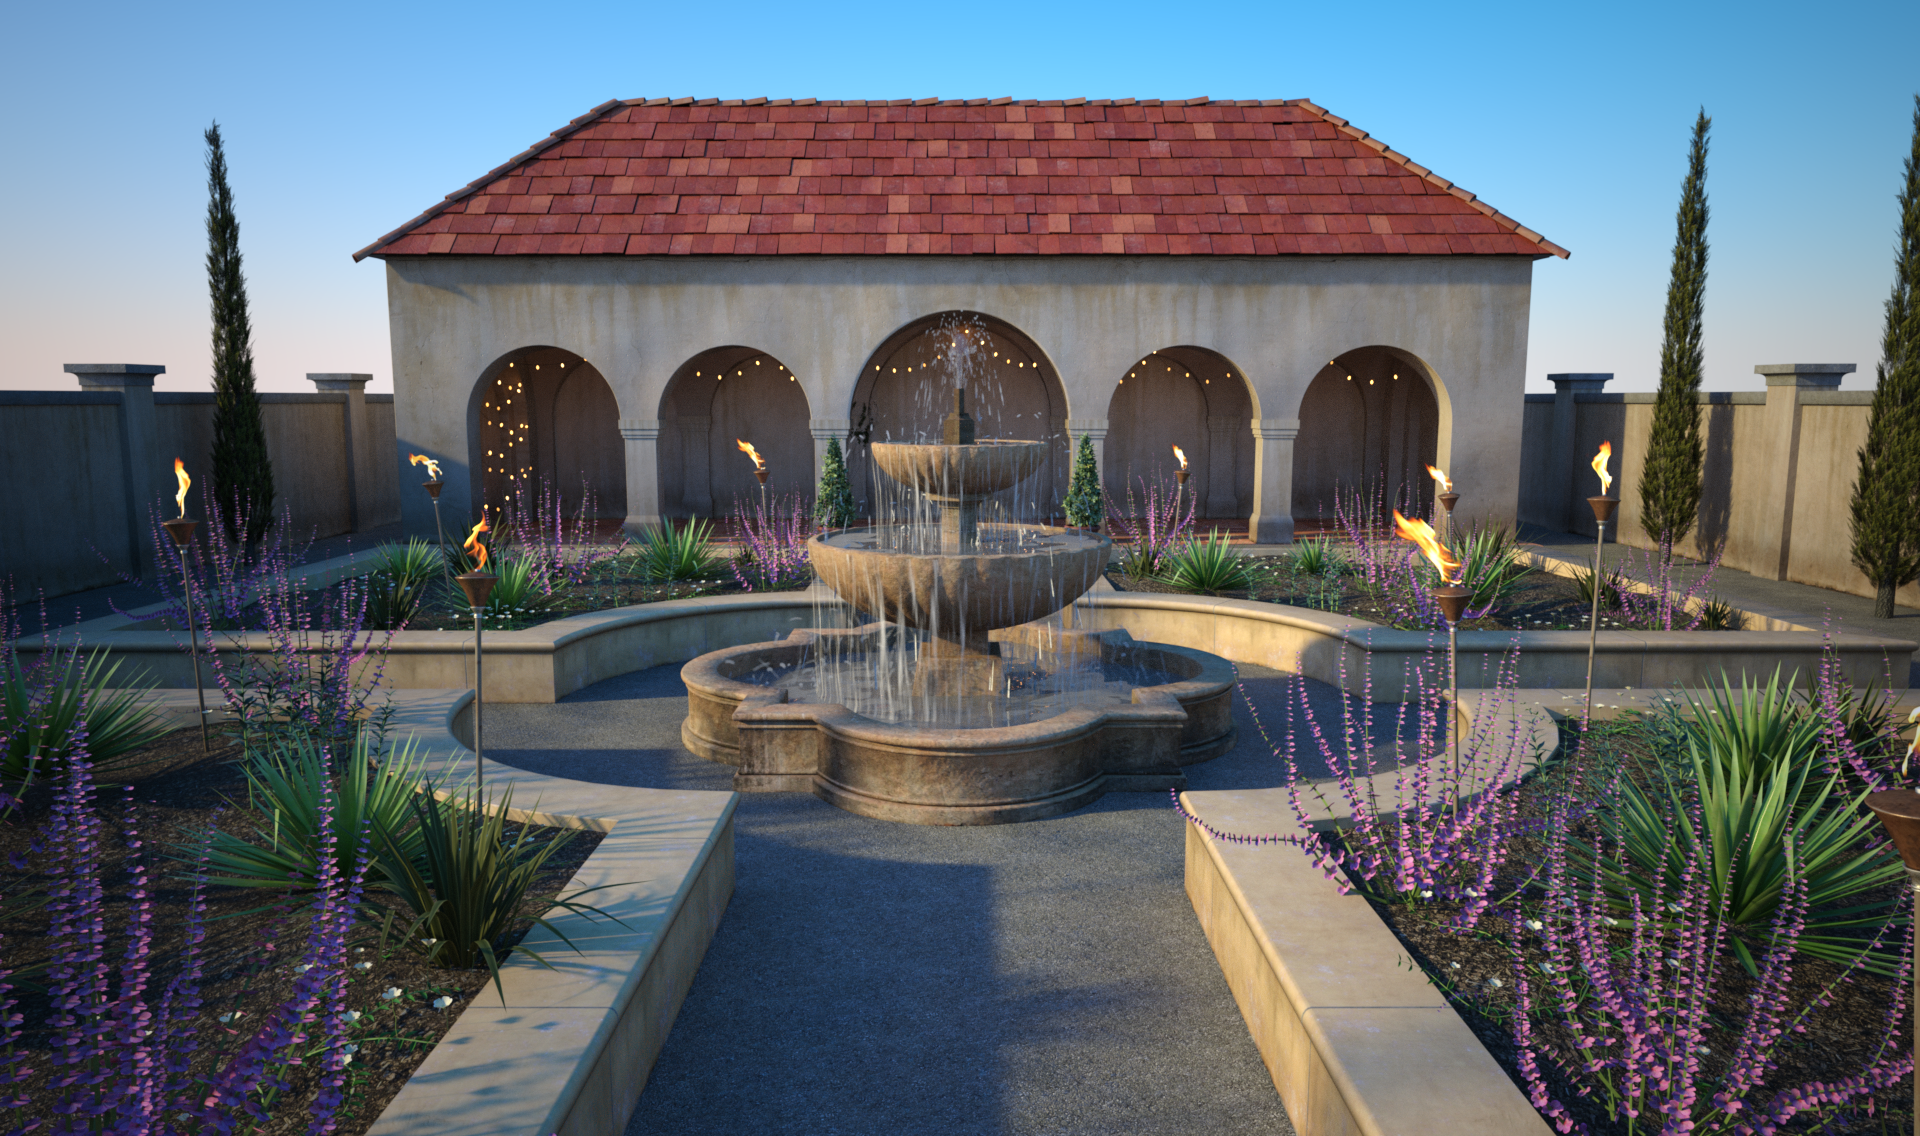 EXT. FOUNTAIN COURTYARD 1 – DAY